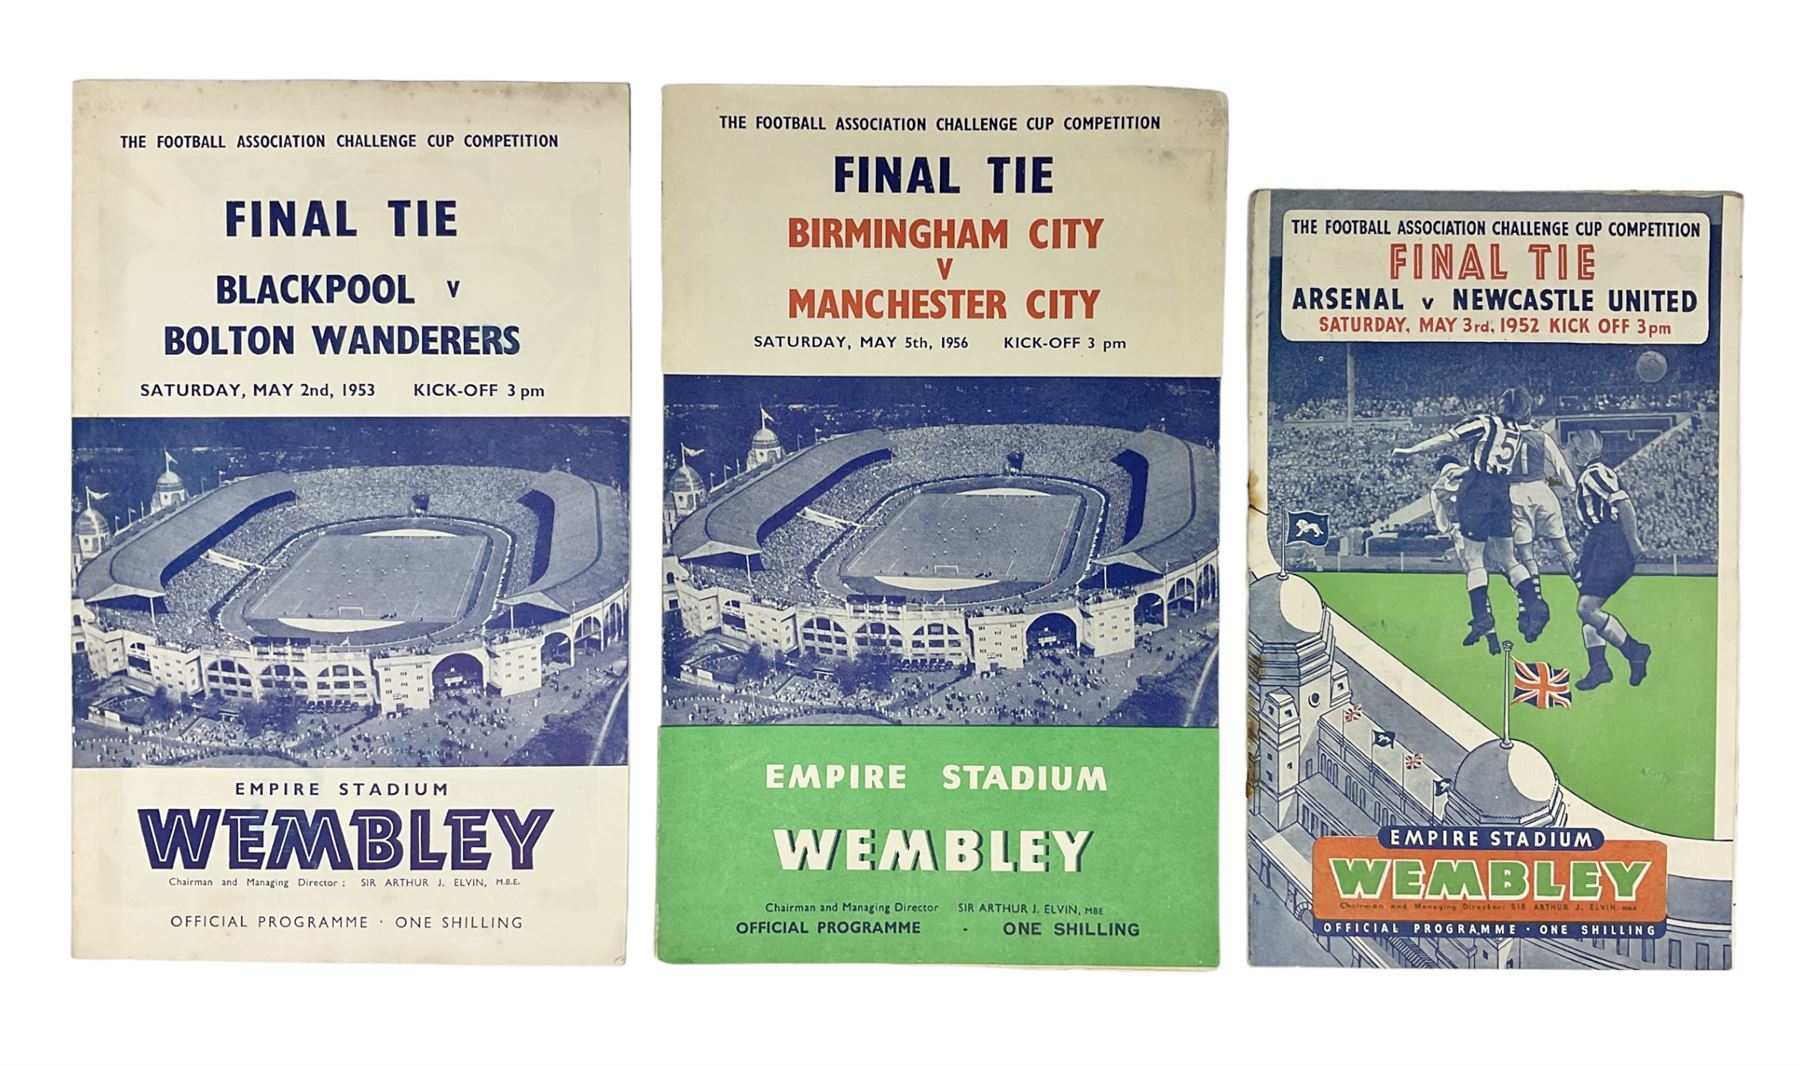 Three F.A. Cup Final programmes at Wembley - 1952 Arsenal v Newcastle United played on May 3rd; 1953